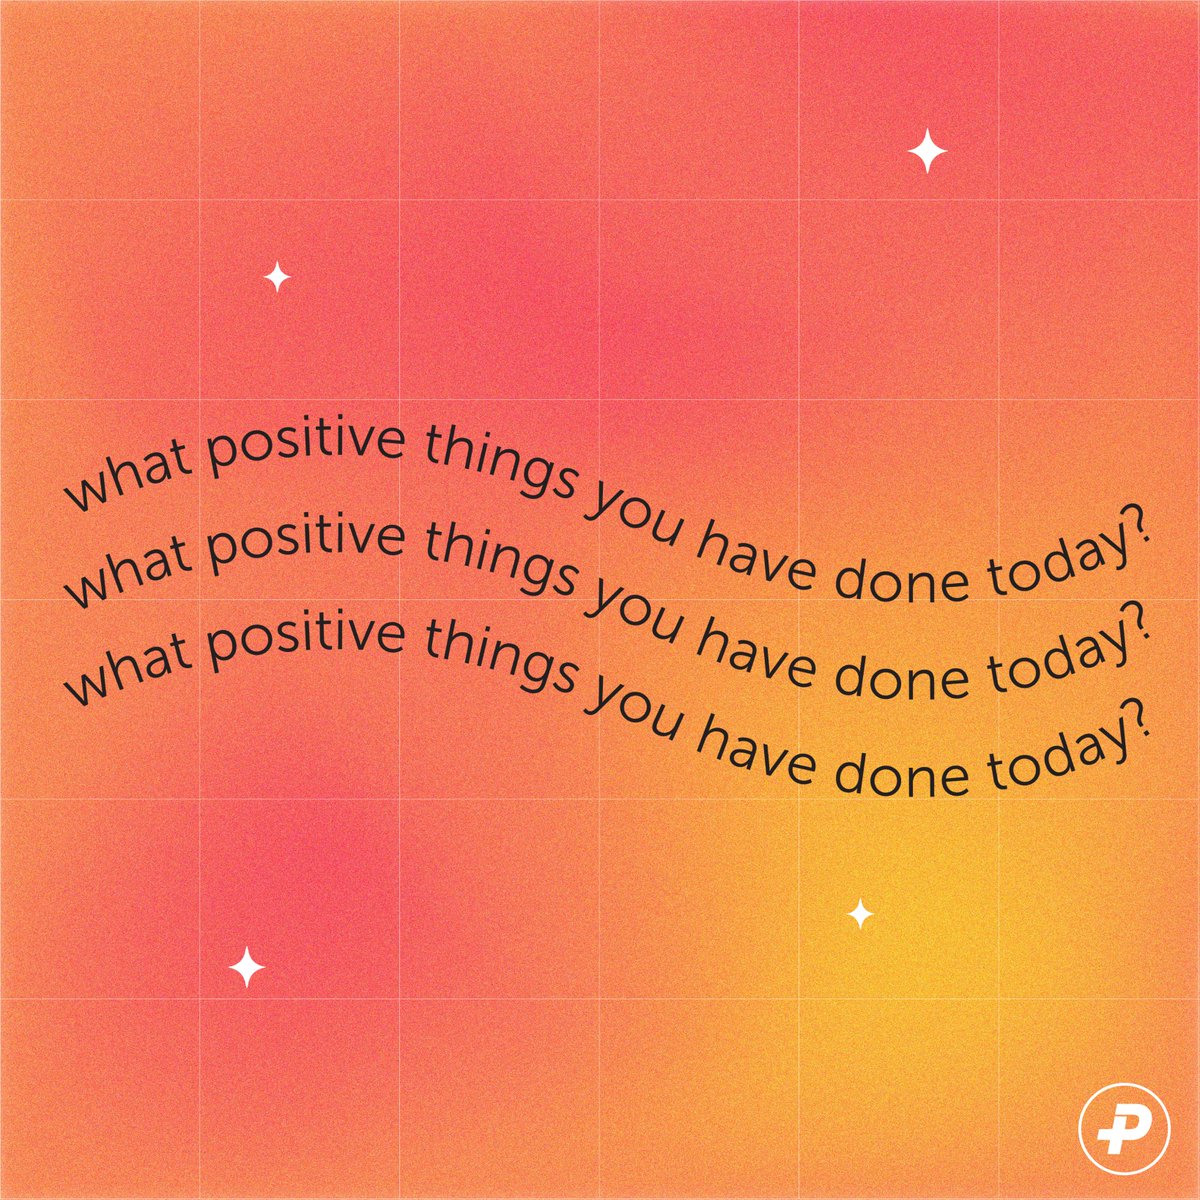 What positive things have you done today?
Like / Follow / Subscribe / Share / Support

.#positivenation  #BelieveInYourself #YouAreBrave #DreamBig #AchieveMore #positivevibes #quotes #quote #quotesdaily #love #PositiveEnergy #goodvibesonly #positivity #motivation #life